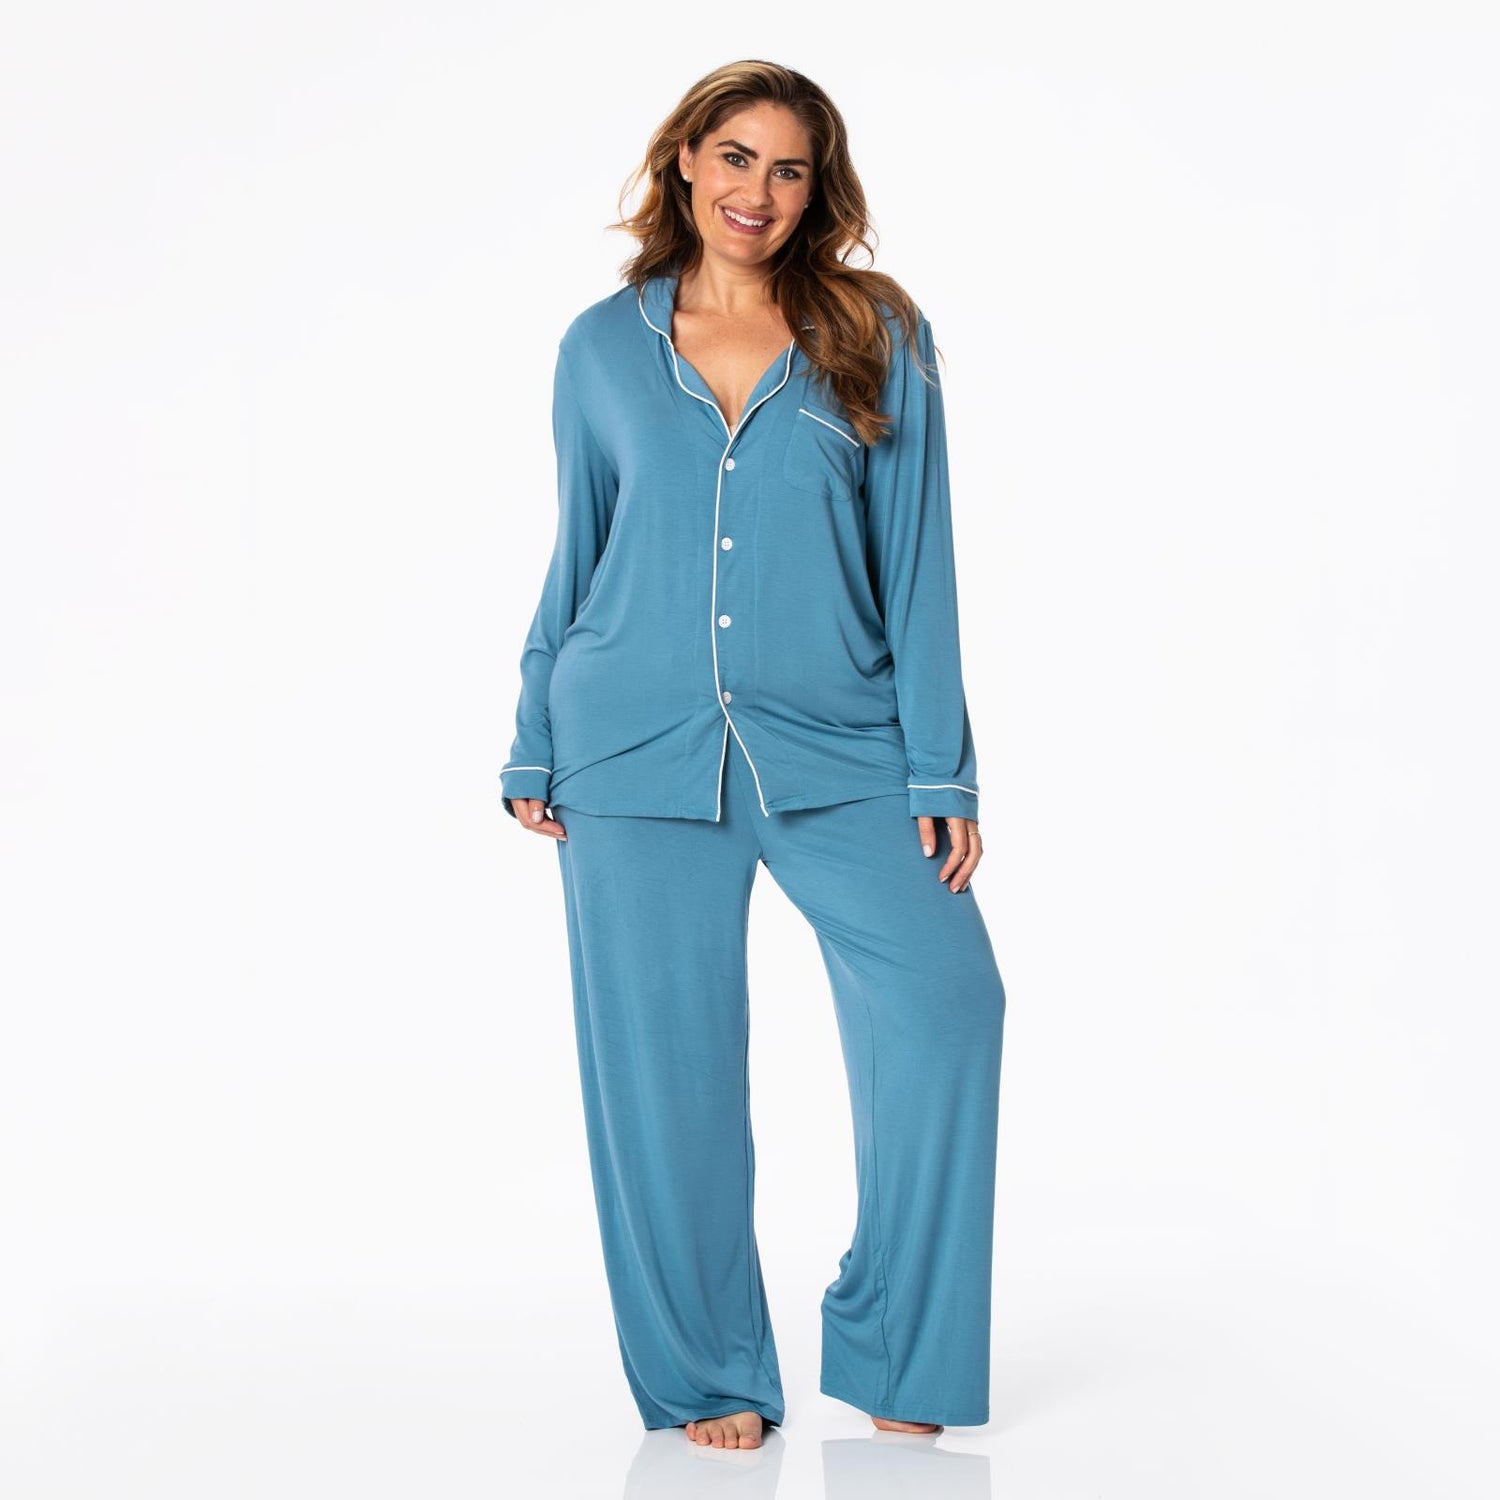 Women's Long Sleeve Collared Pajama Set in Parisian Blue with Natural